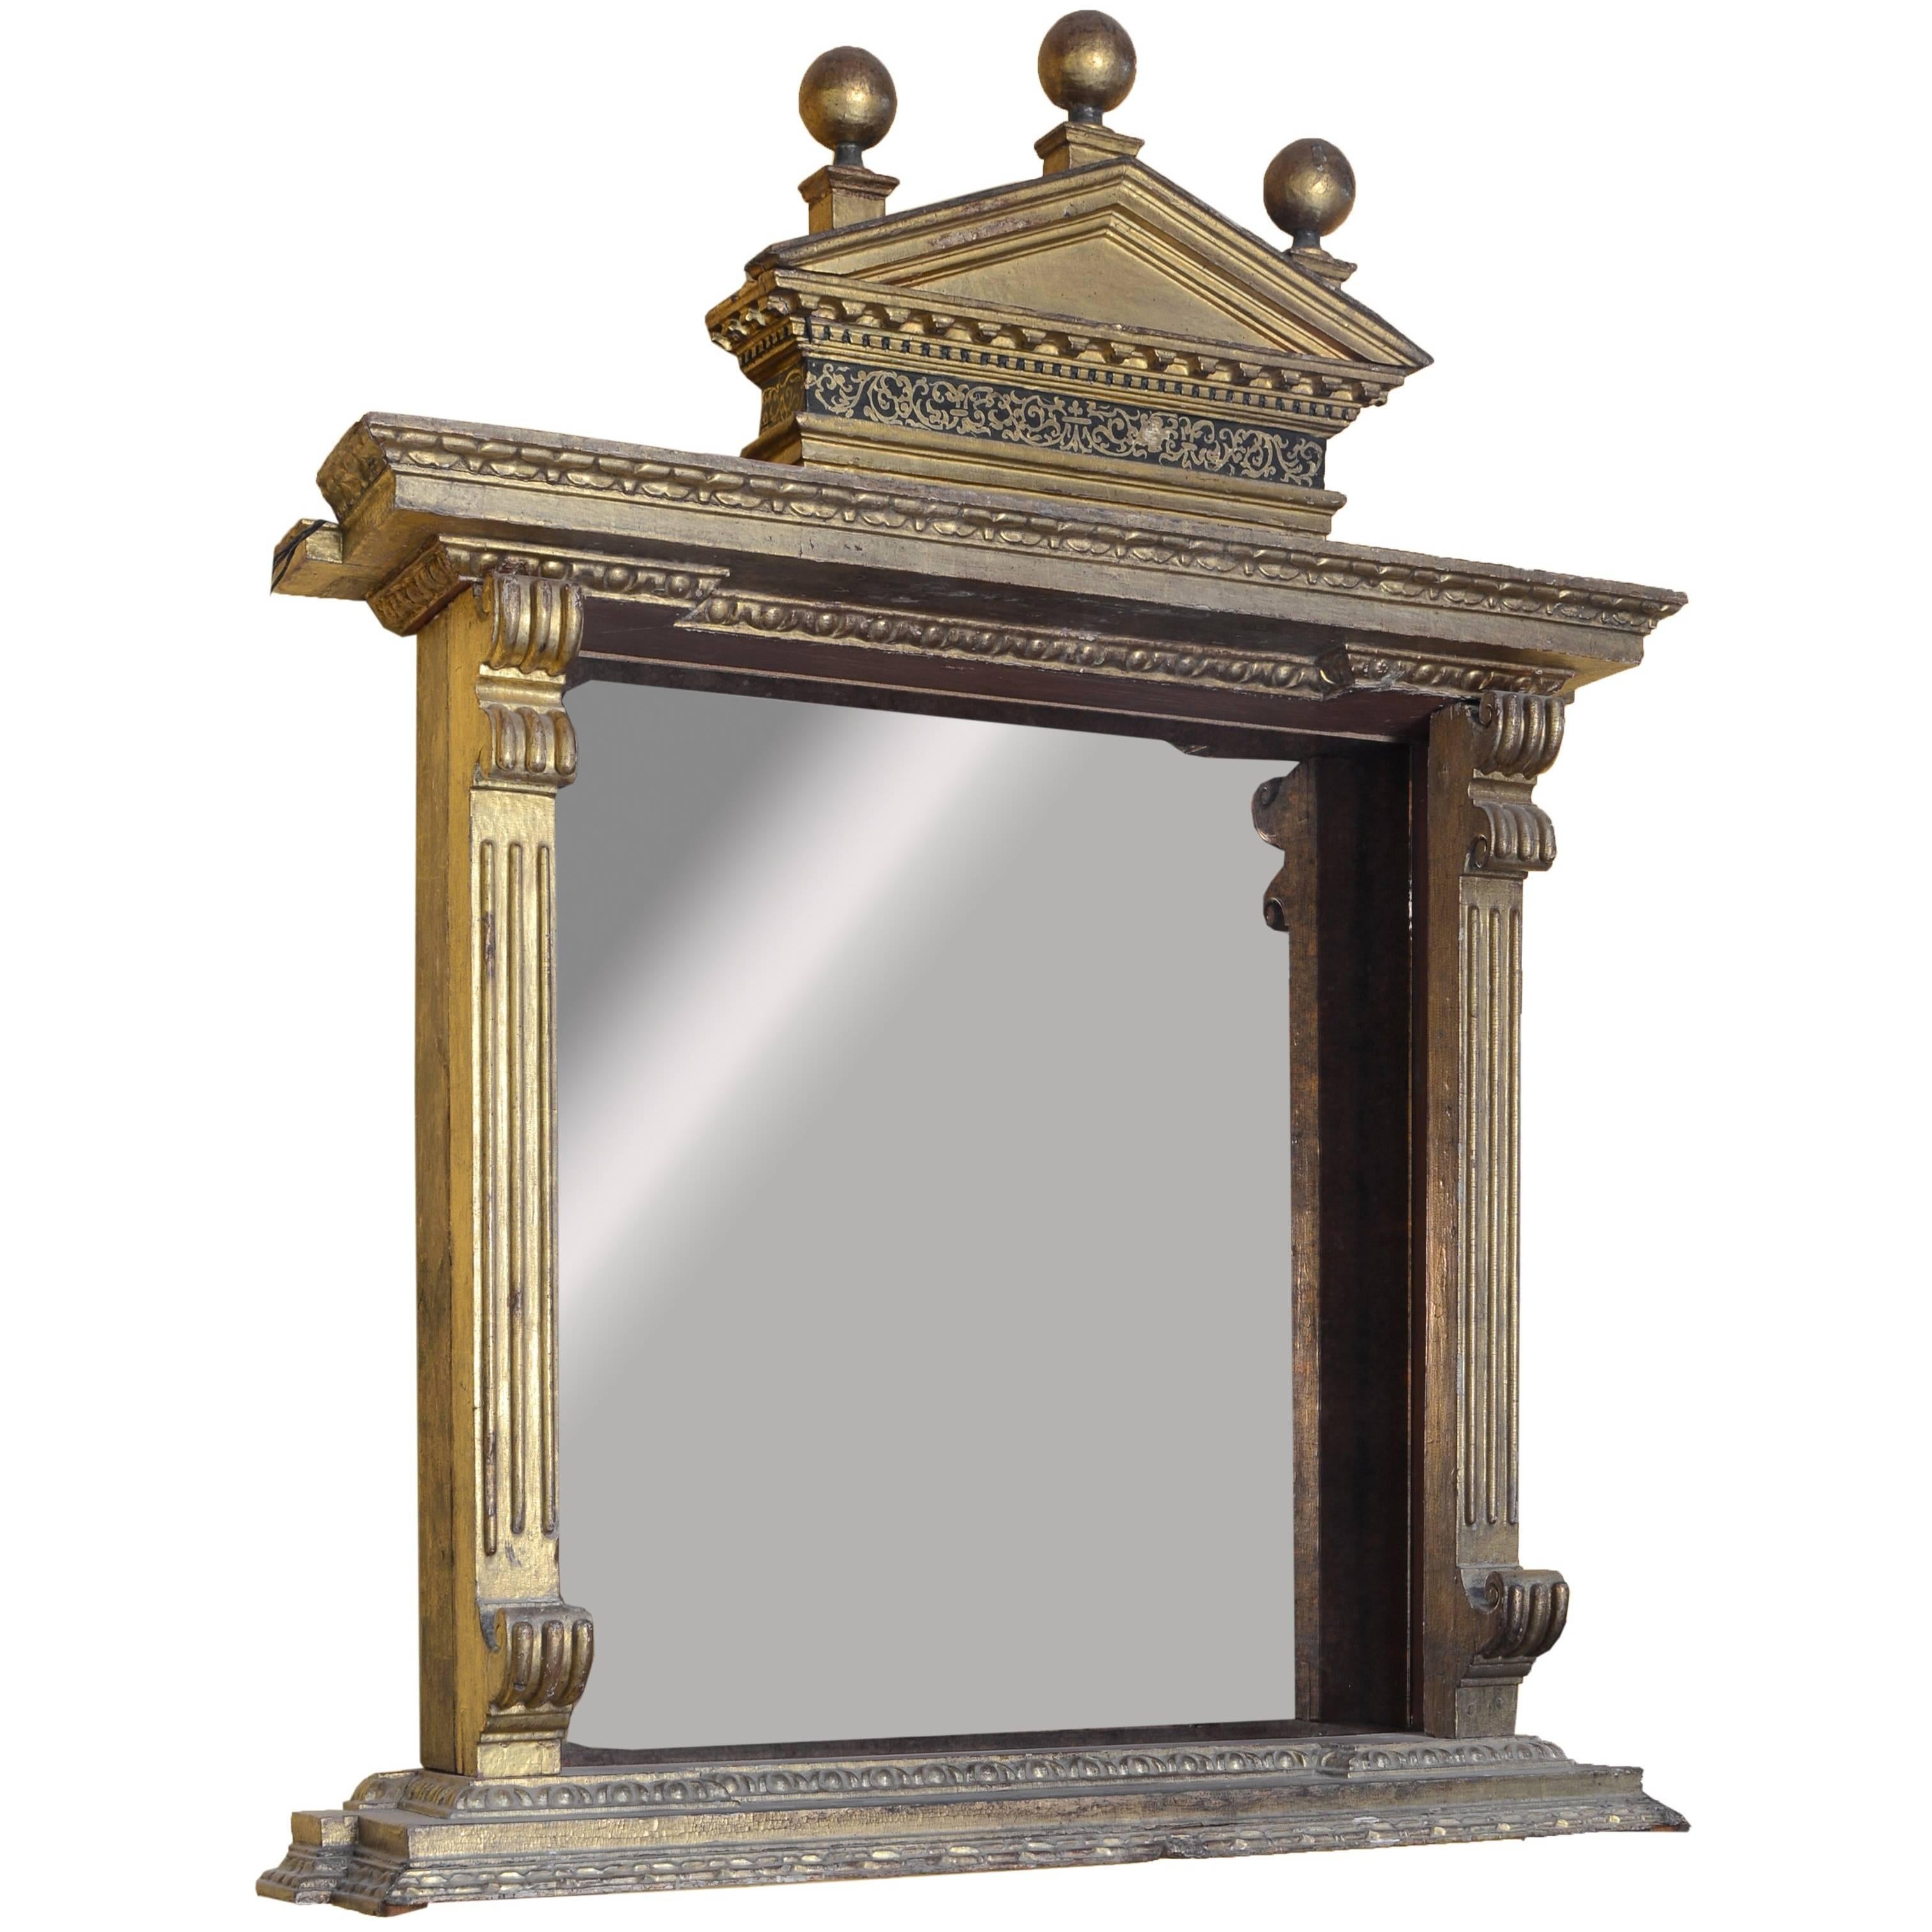 Frame Carved Wood, Polychrome and Gold, 16th Century For Sale